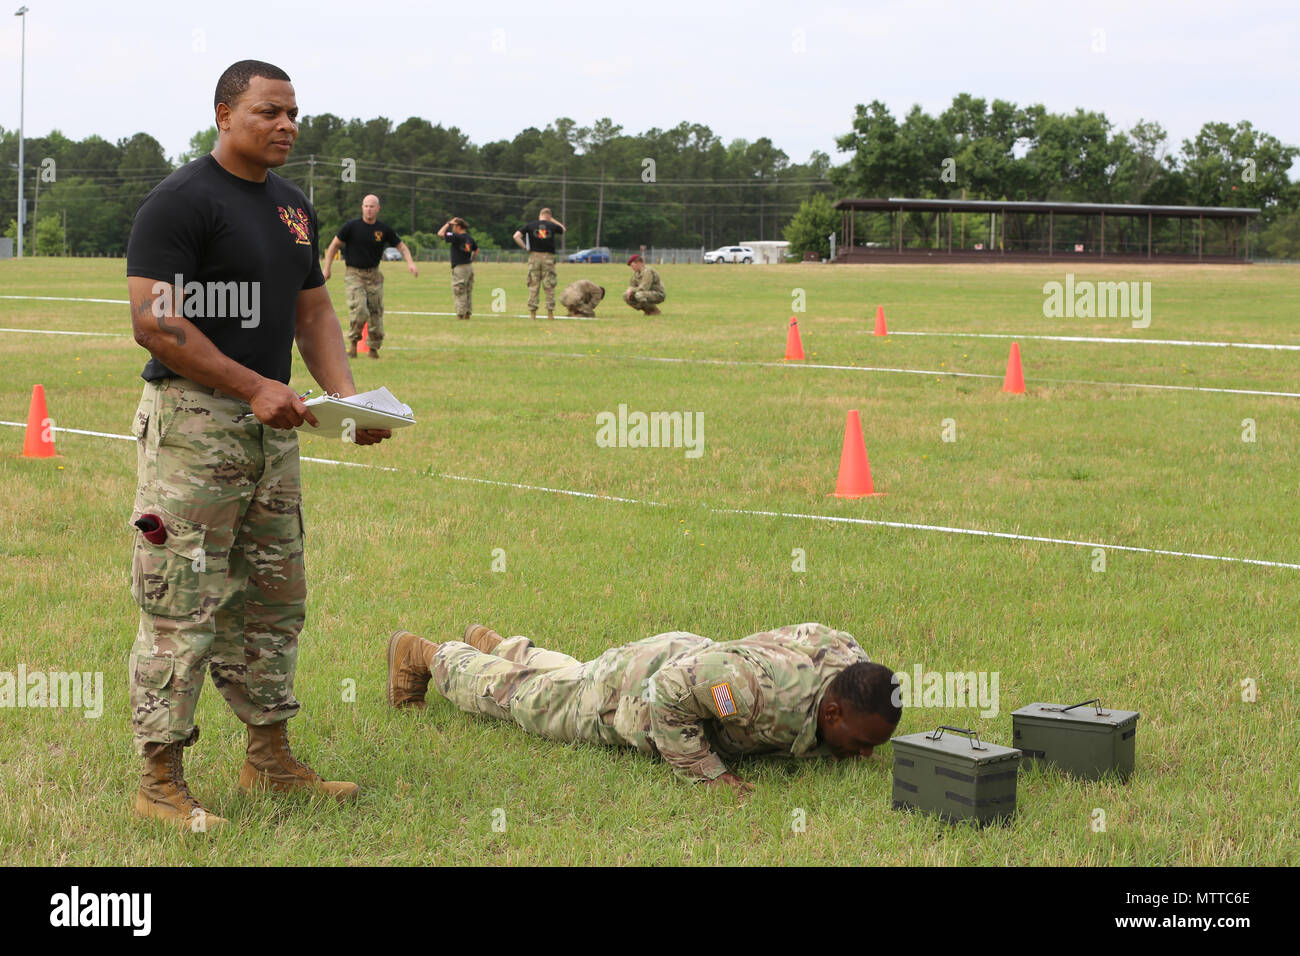 U.S. Army Sgt. Javonte Parker, assigned to 189th CSSB, Sustainment Brigade, 82nd Airborne Division, does pushups after throwing a grenade during the Maneuver Under Fire portion of the All American Week XXIX Combat Fitnees Test on Pike Field at Fort Bragg, N.C., May 21, 2018.During All American Week XXIX, paratroopers from all over the 82nd Division compete in a series of events, The Combat Fitness Test is an event designed to test a Paratrooper's functional fitness and gives a more accurate representation of what Paratroopers are trained to do. (U.S. Army photo by Pfc. Tescia Mims) Stock Photo